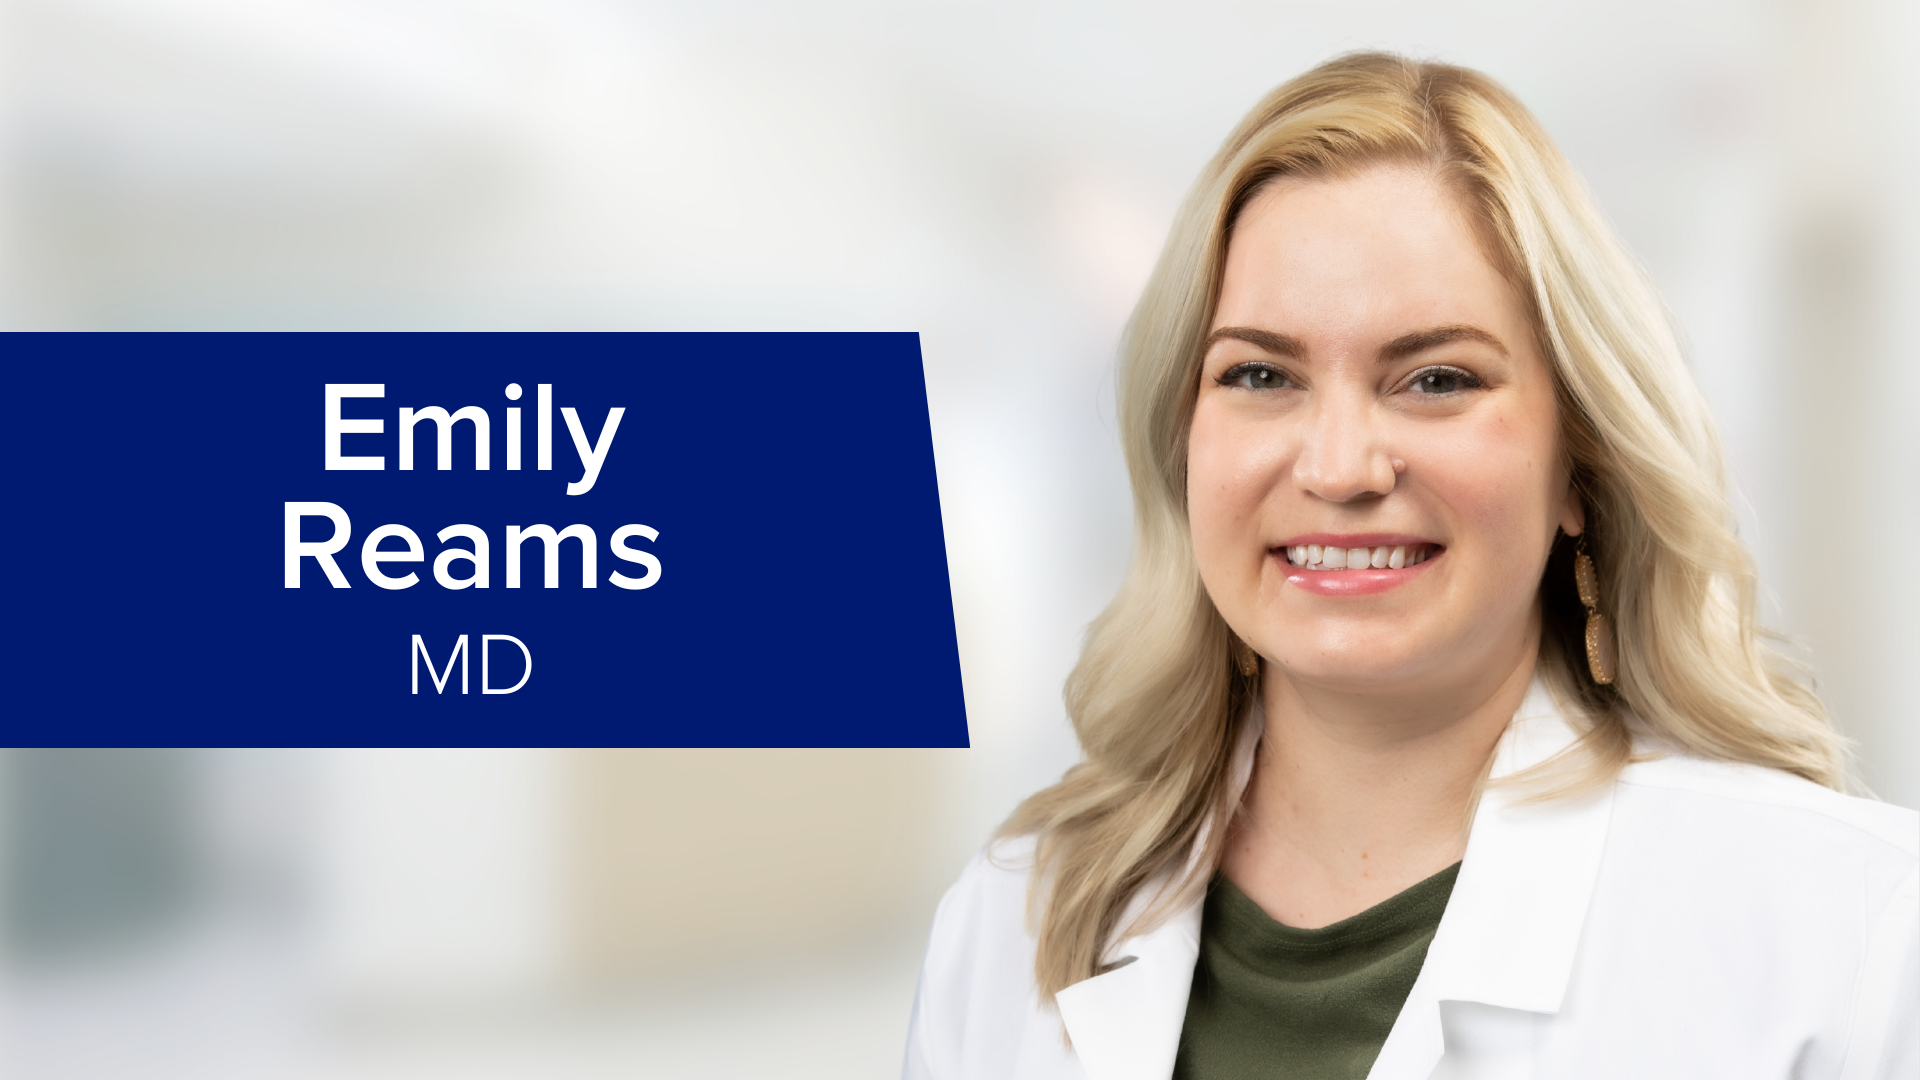 Emily Reams, MD